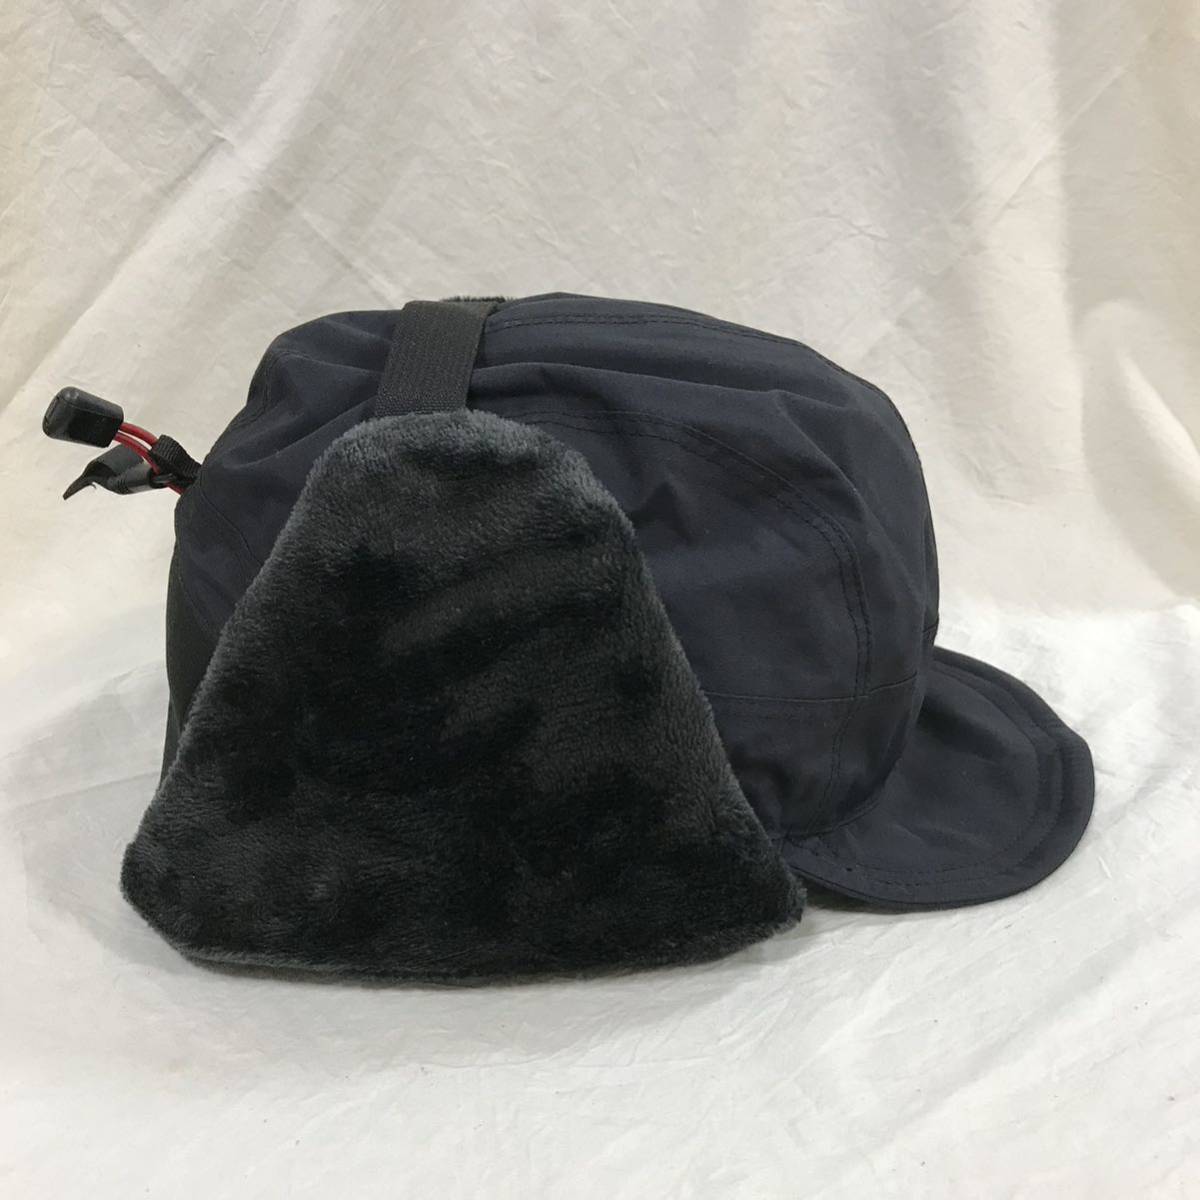 THE NORTH FACE EXPEDITION CAP NN42205 GOLDWIN GORE-TEX M Expedition колпак флис Gore-Tex наушники шляпа Frontier 